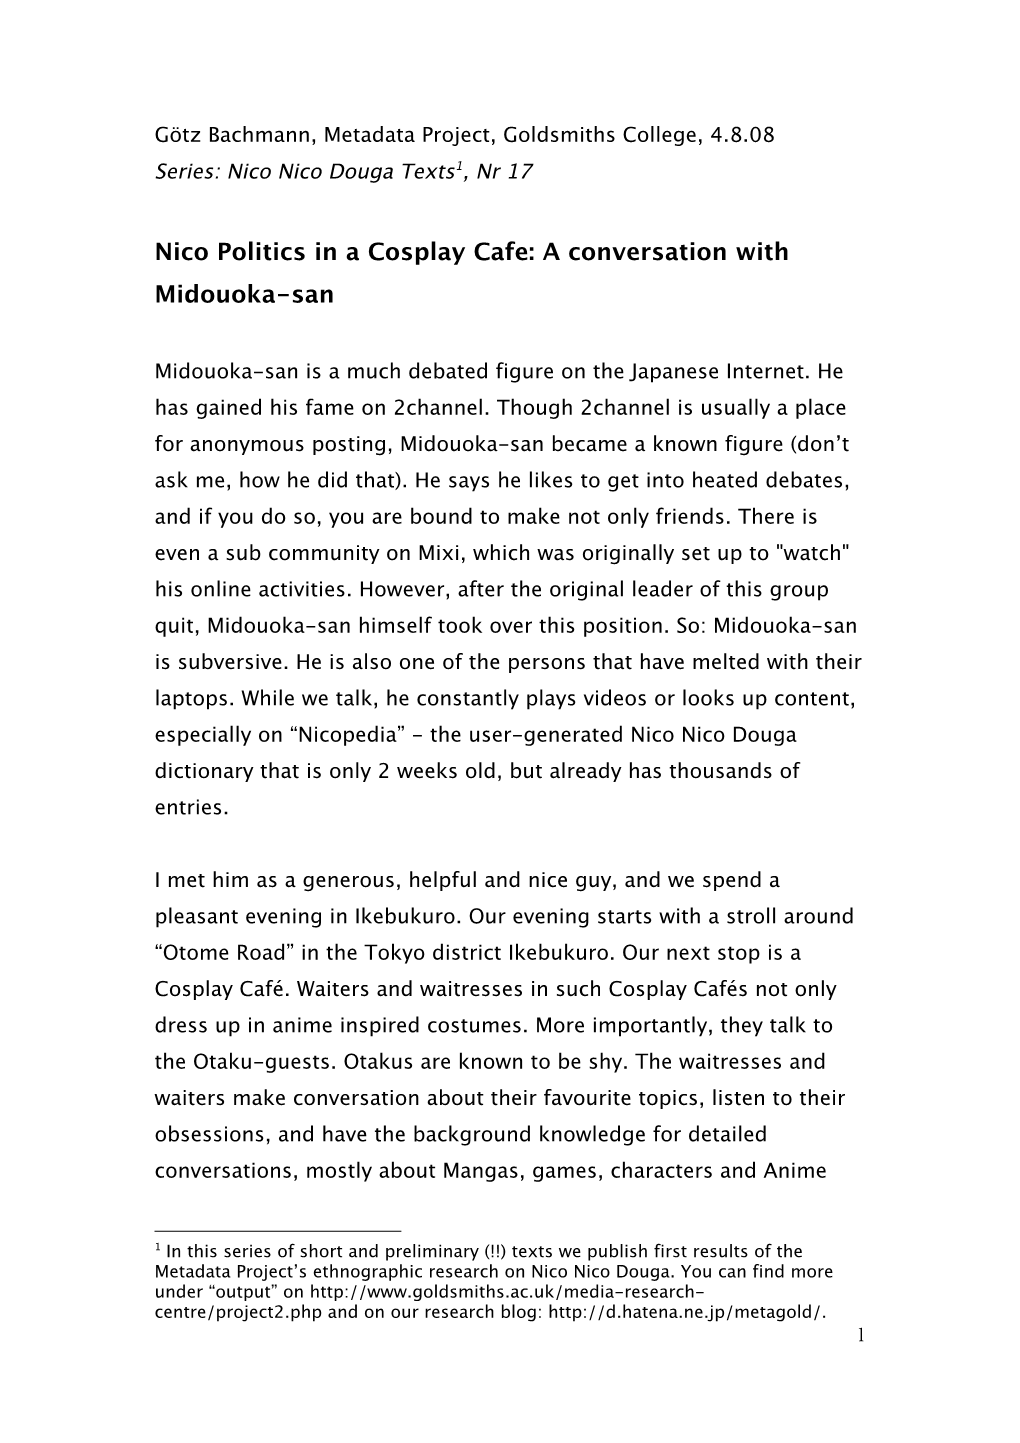 Nico Politics in a Cosplay Cafe: a Conversation with Midouoka-San